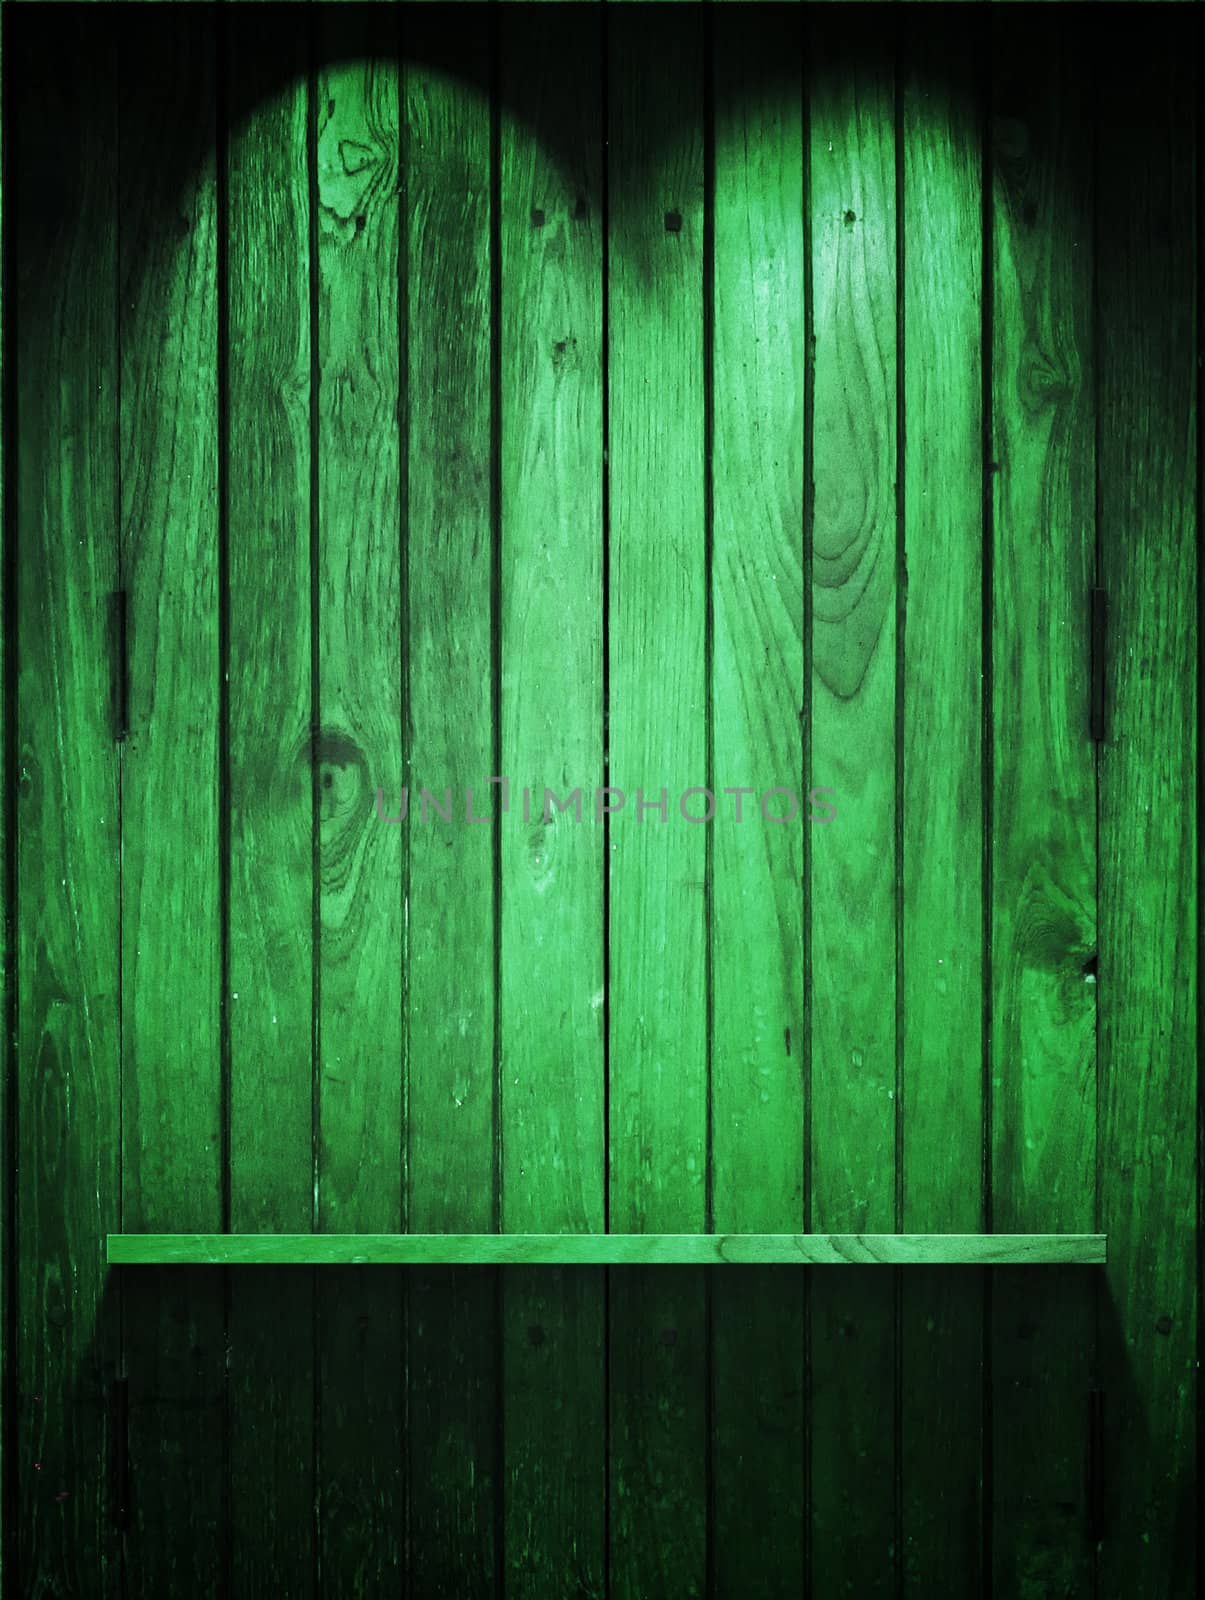 Texture of Green Wood panel and shelf for background